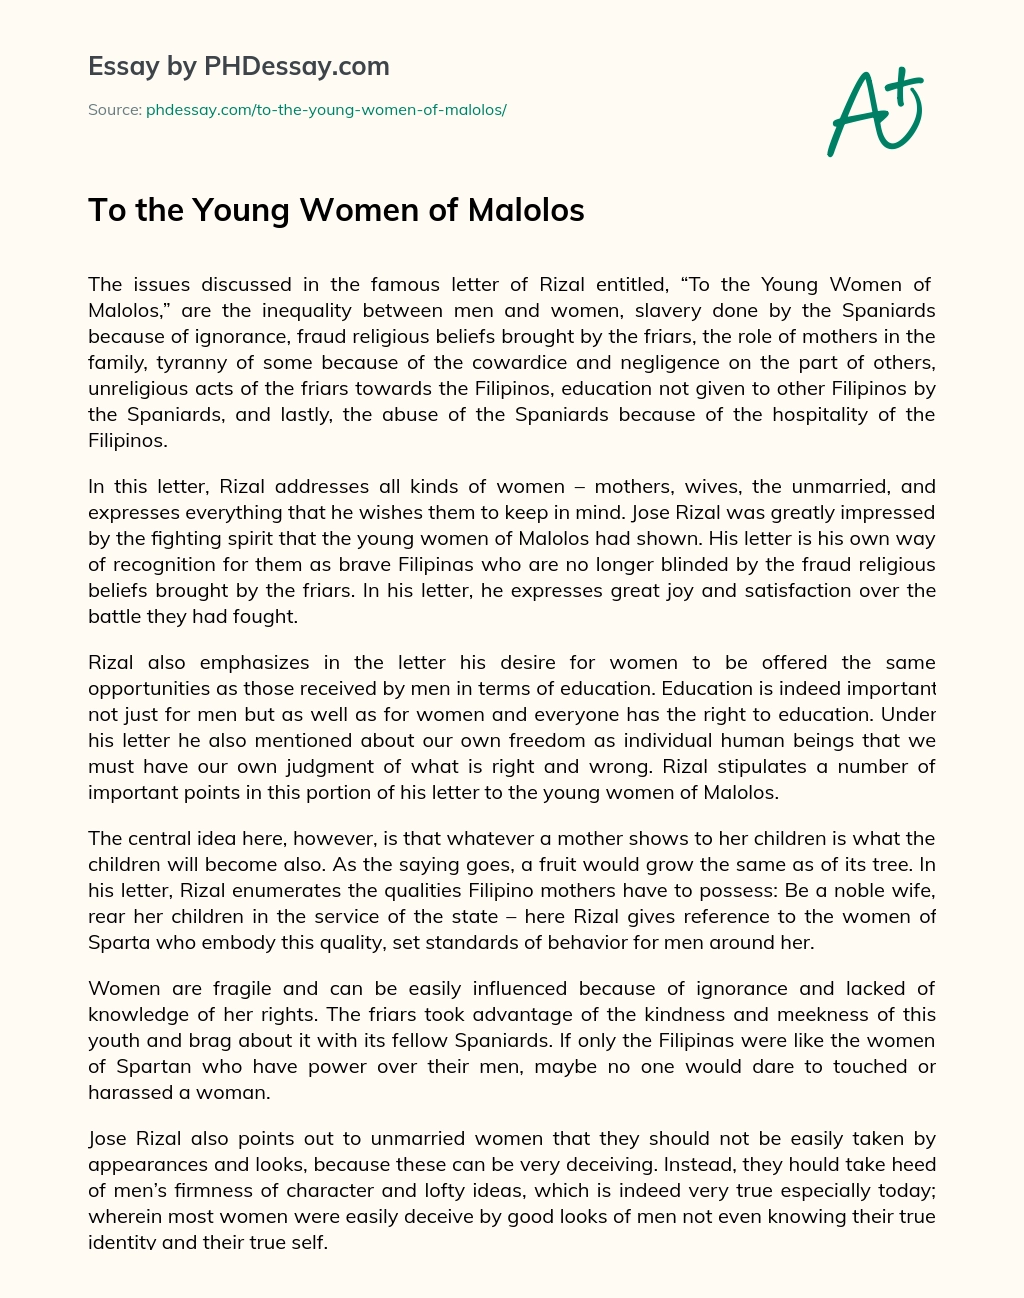 To the Young Women of Malolos essay